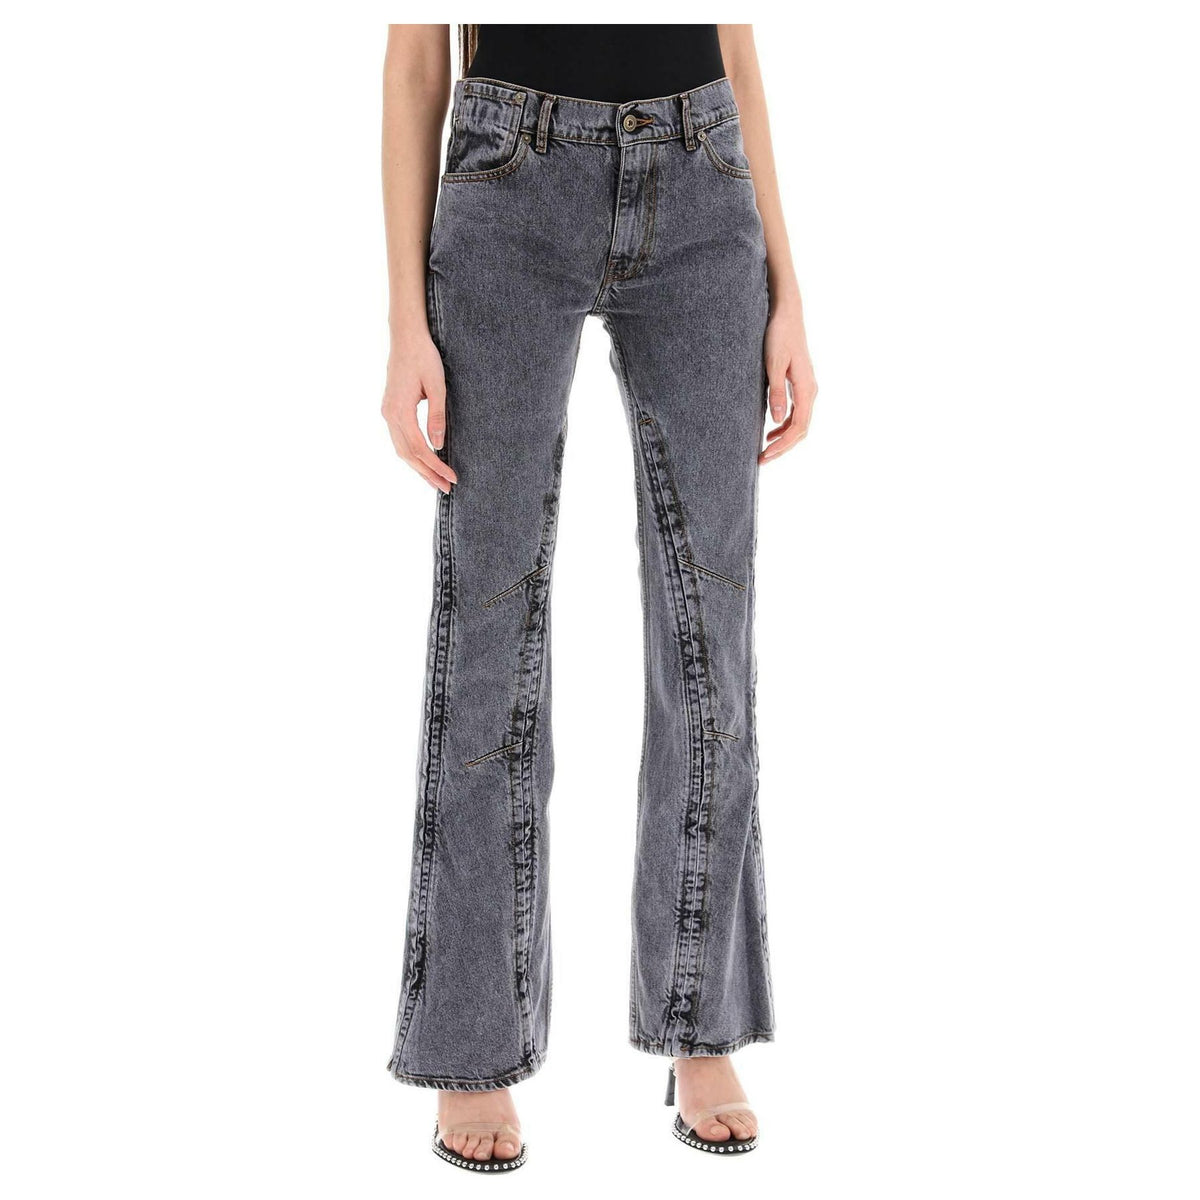 Hook And Eye Flared Jeans Y PROJECT JOHN JULIA.